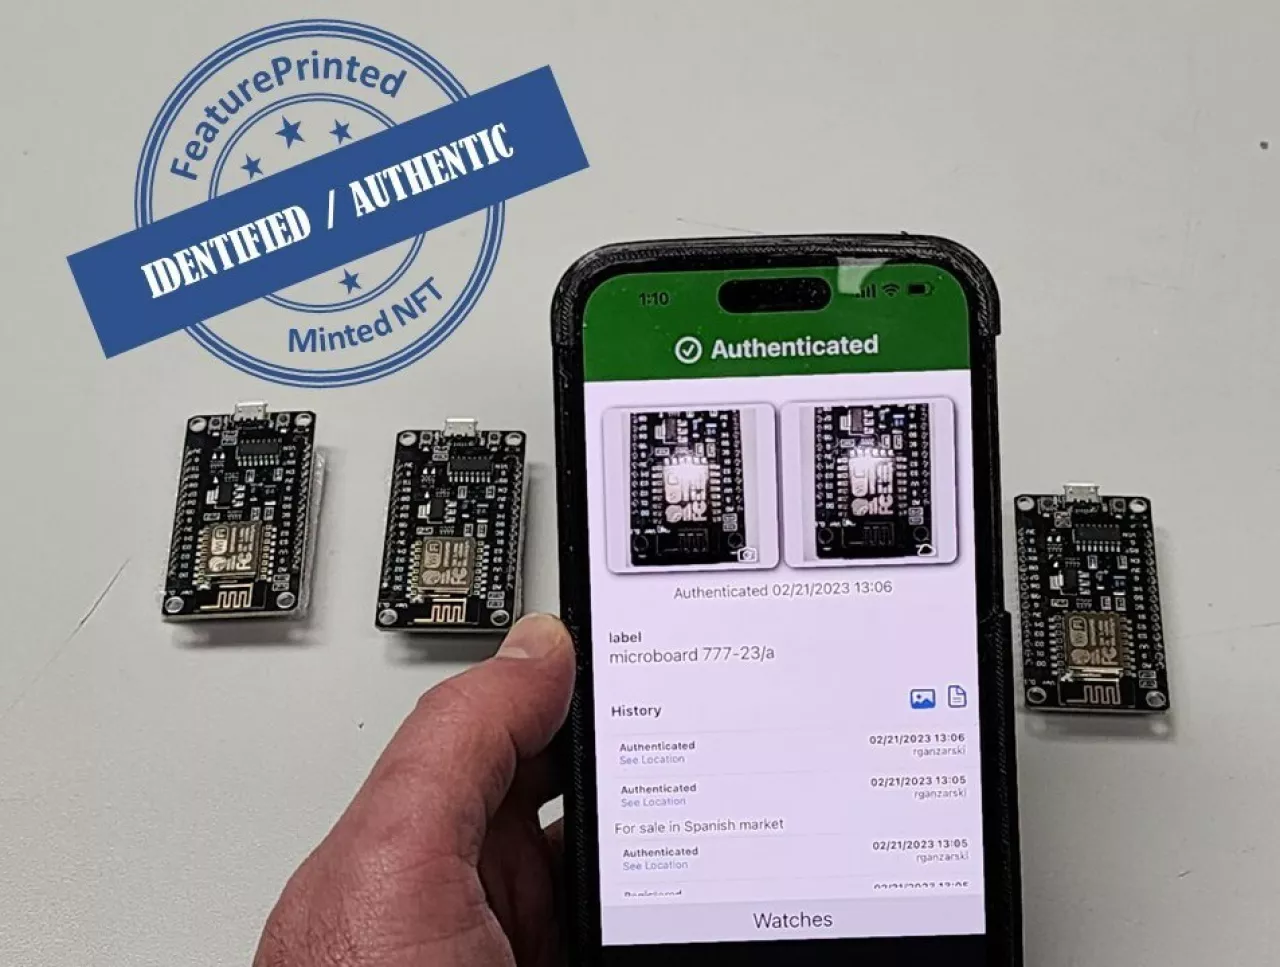 Alitheon and SIMBA Chain deliver the first solution to link irrefutable authentication of a physical item with NFT verification of ownership. img#1